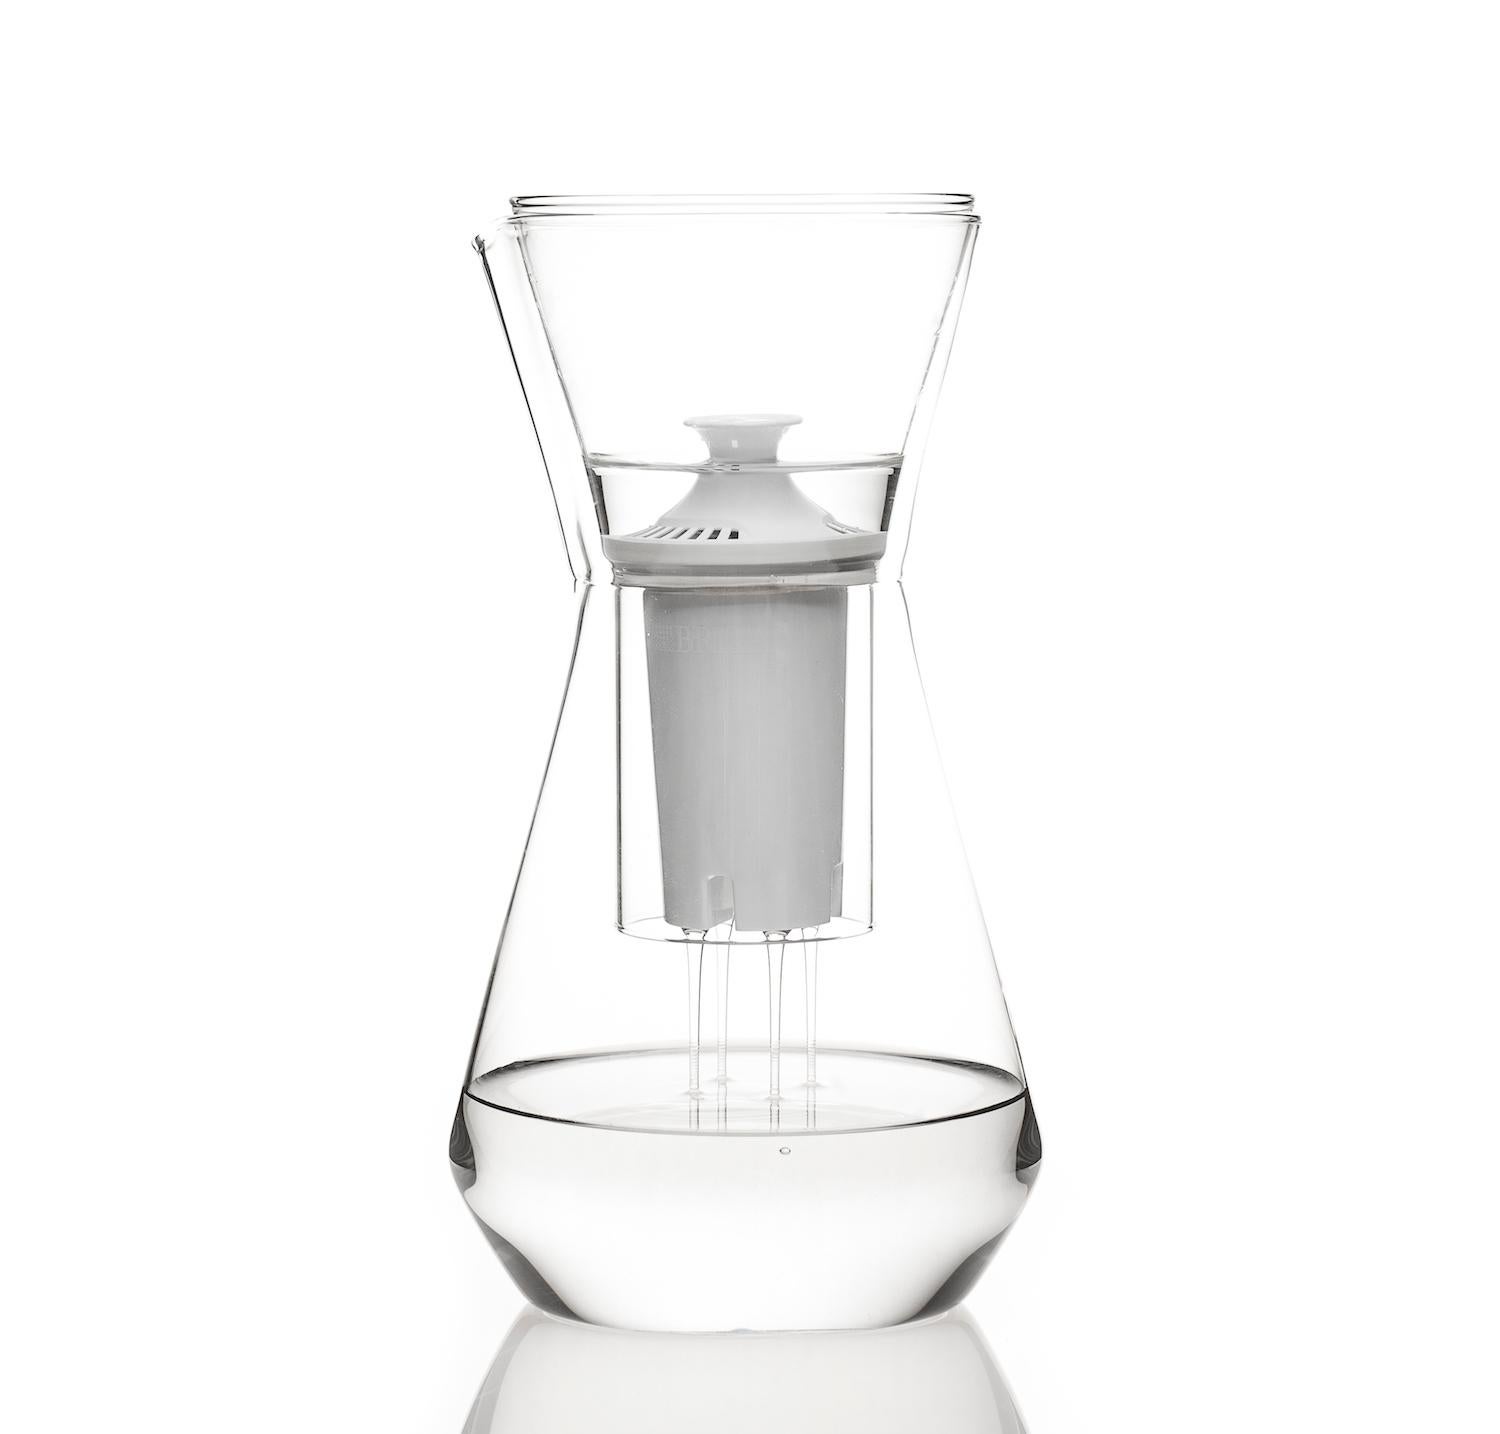 Finding the beauty in a simple, everyday object is one of the joys of life. Be it left out on your counter or table the contemporary clear glass Talise water carafe pitcher is minimal and can fit with any home. For use with the glass funnel for